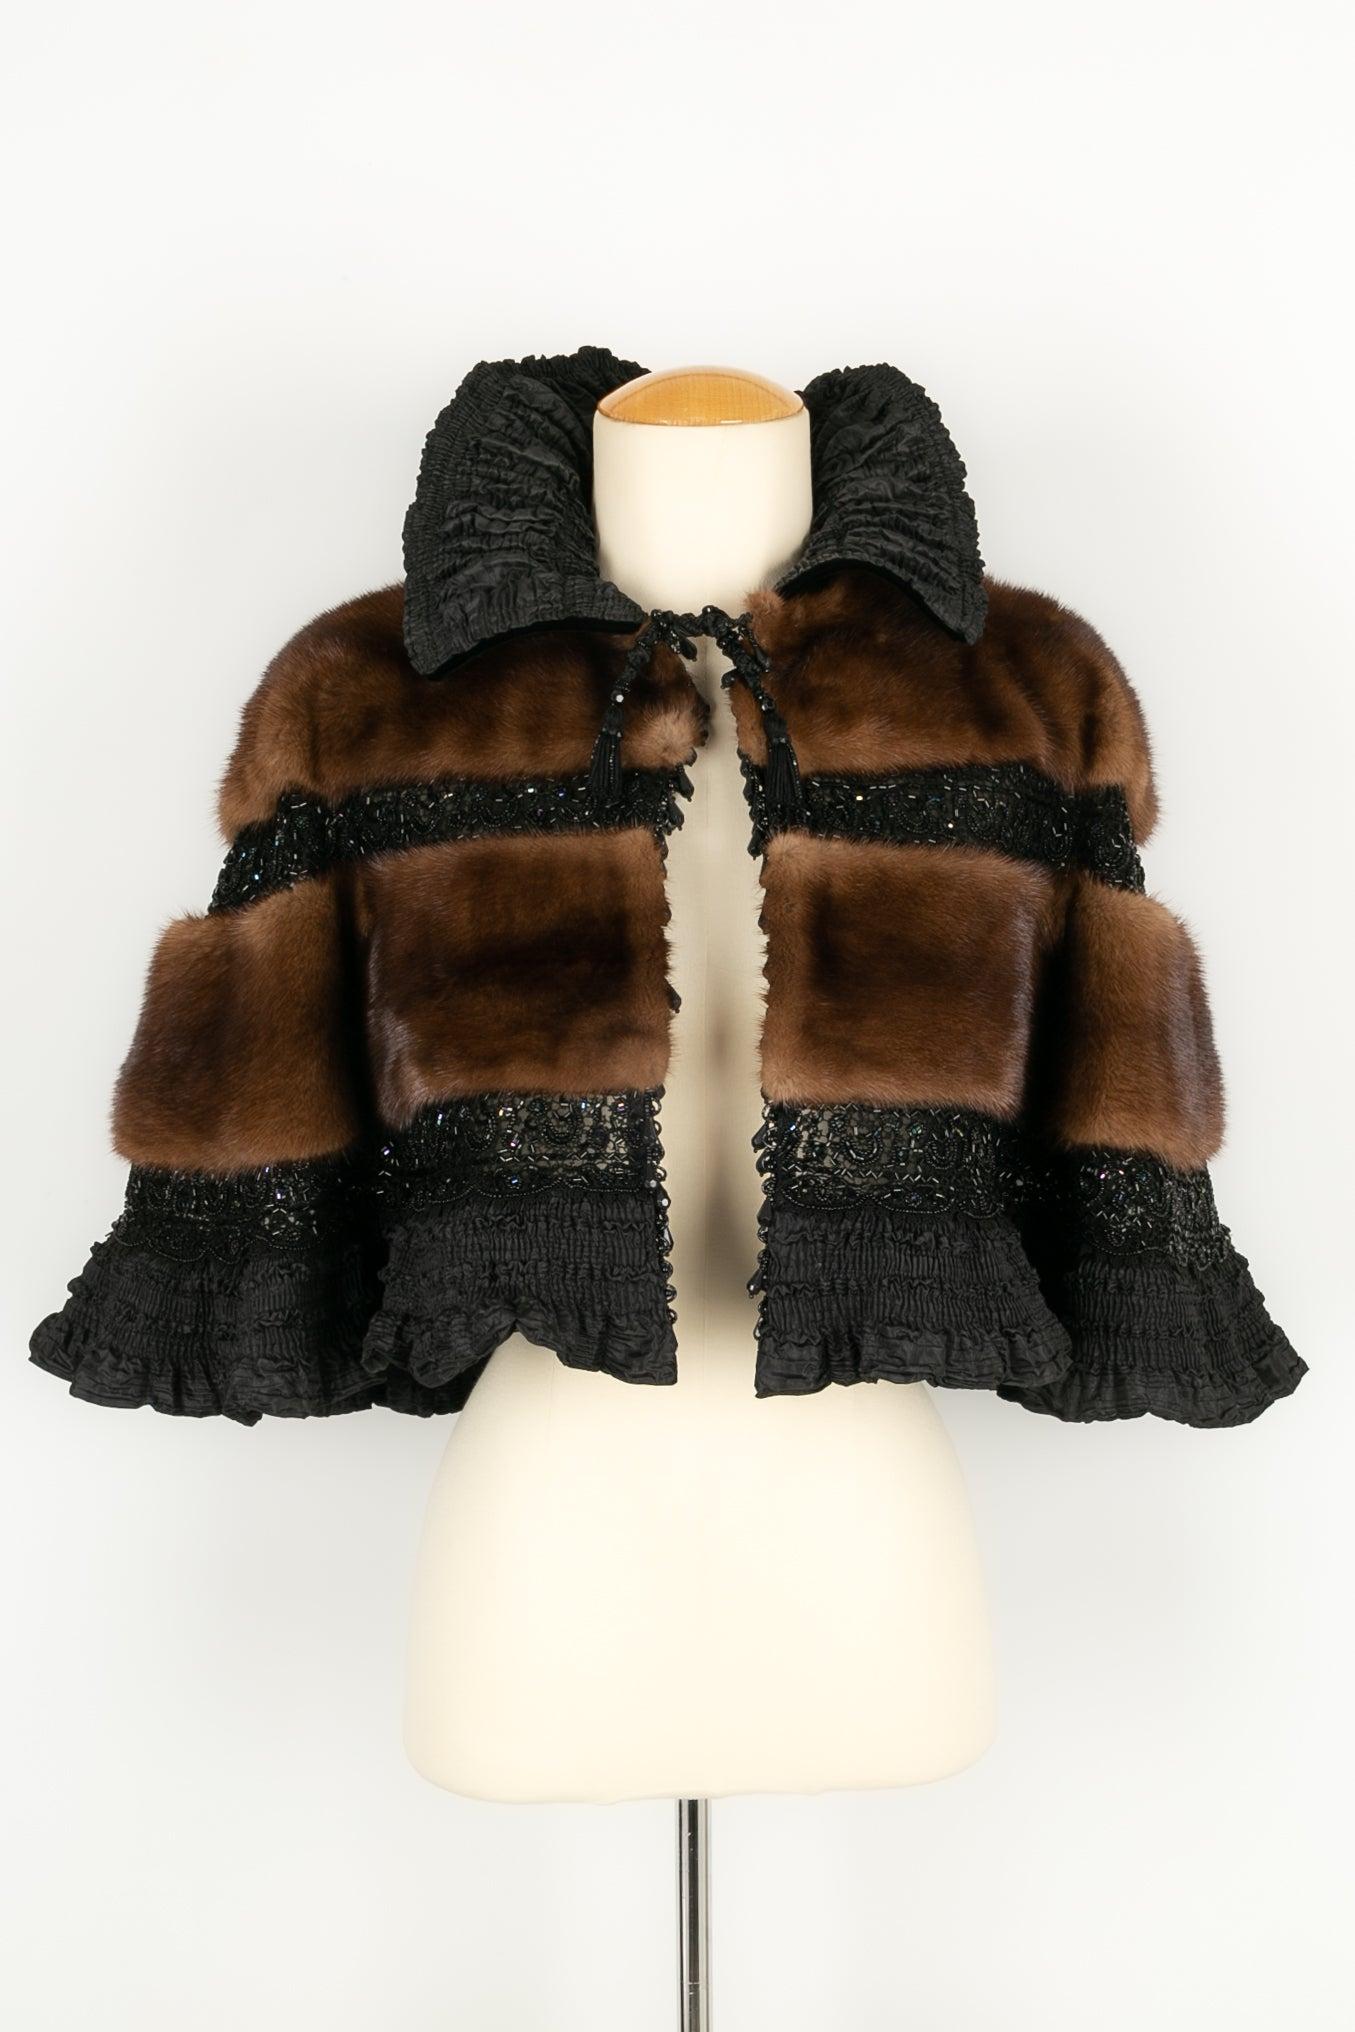 Women's Christian Lacroix Cape in Taffeta, Lace, Beads and Mink Fur, 1998/99 For Sale